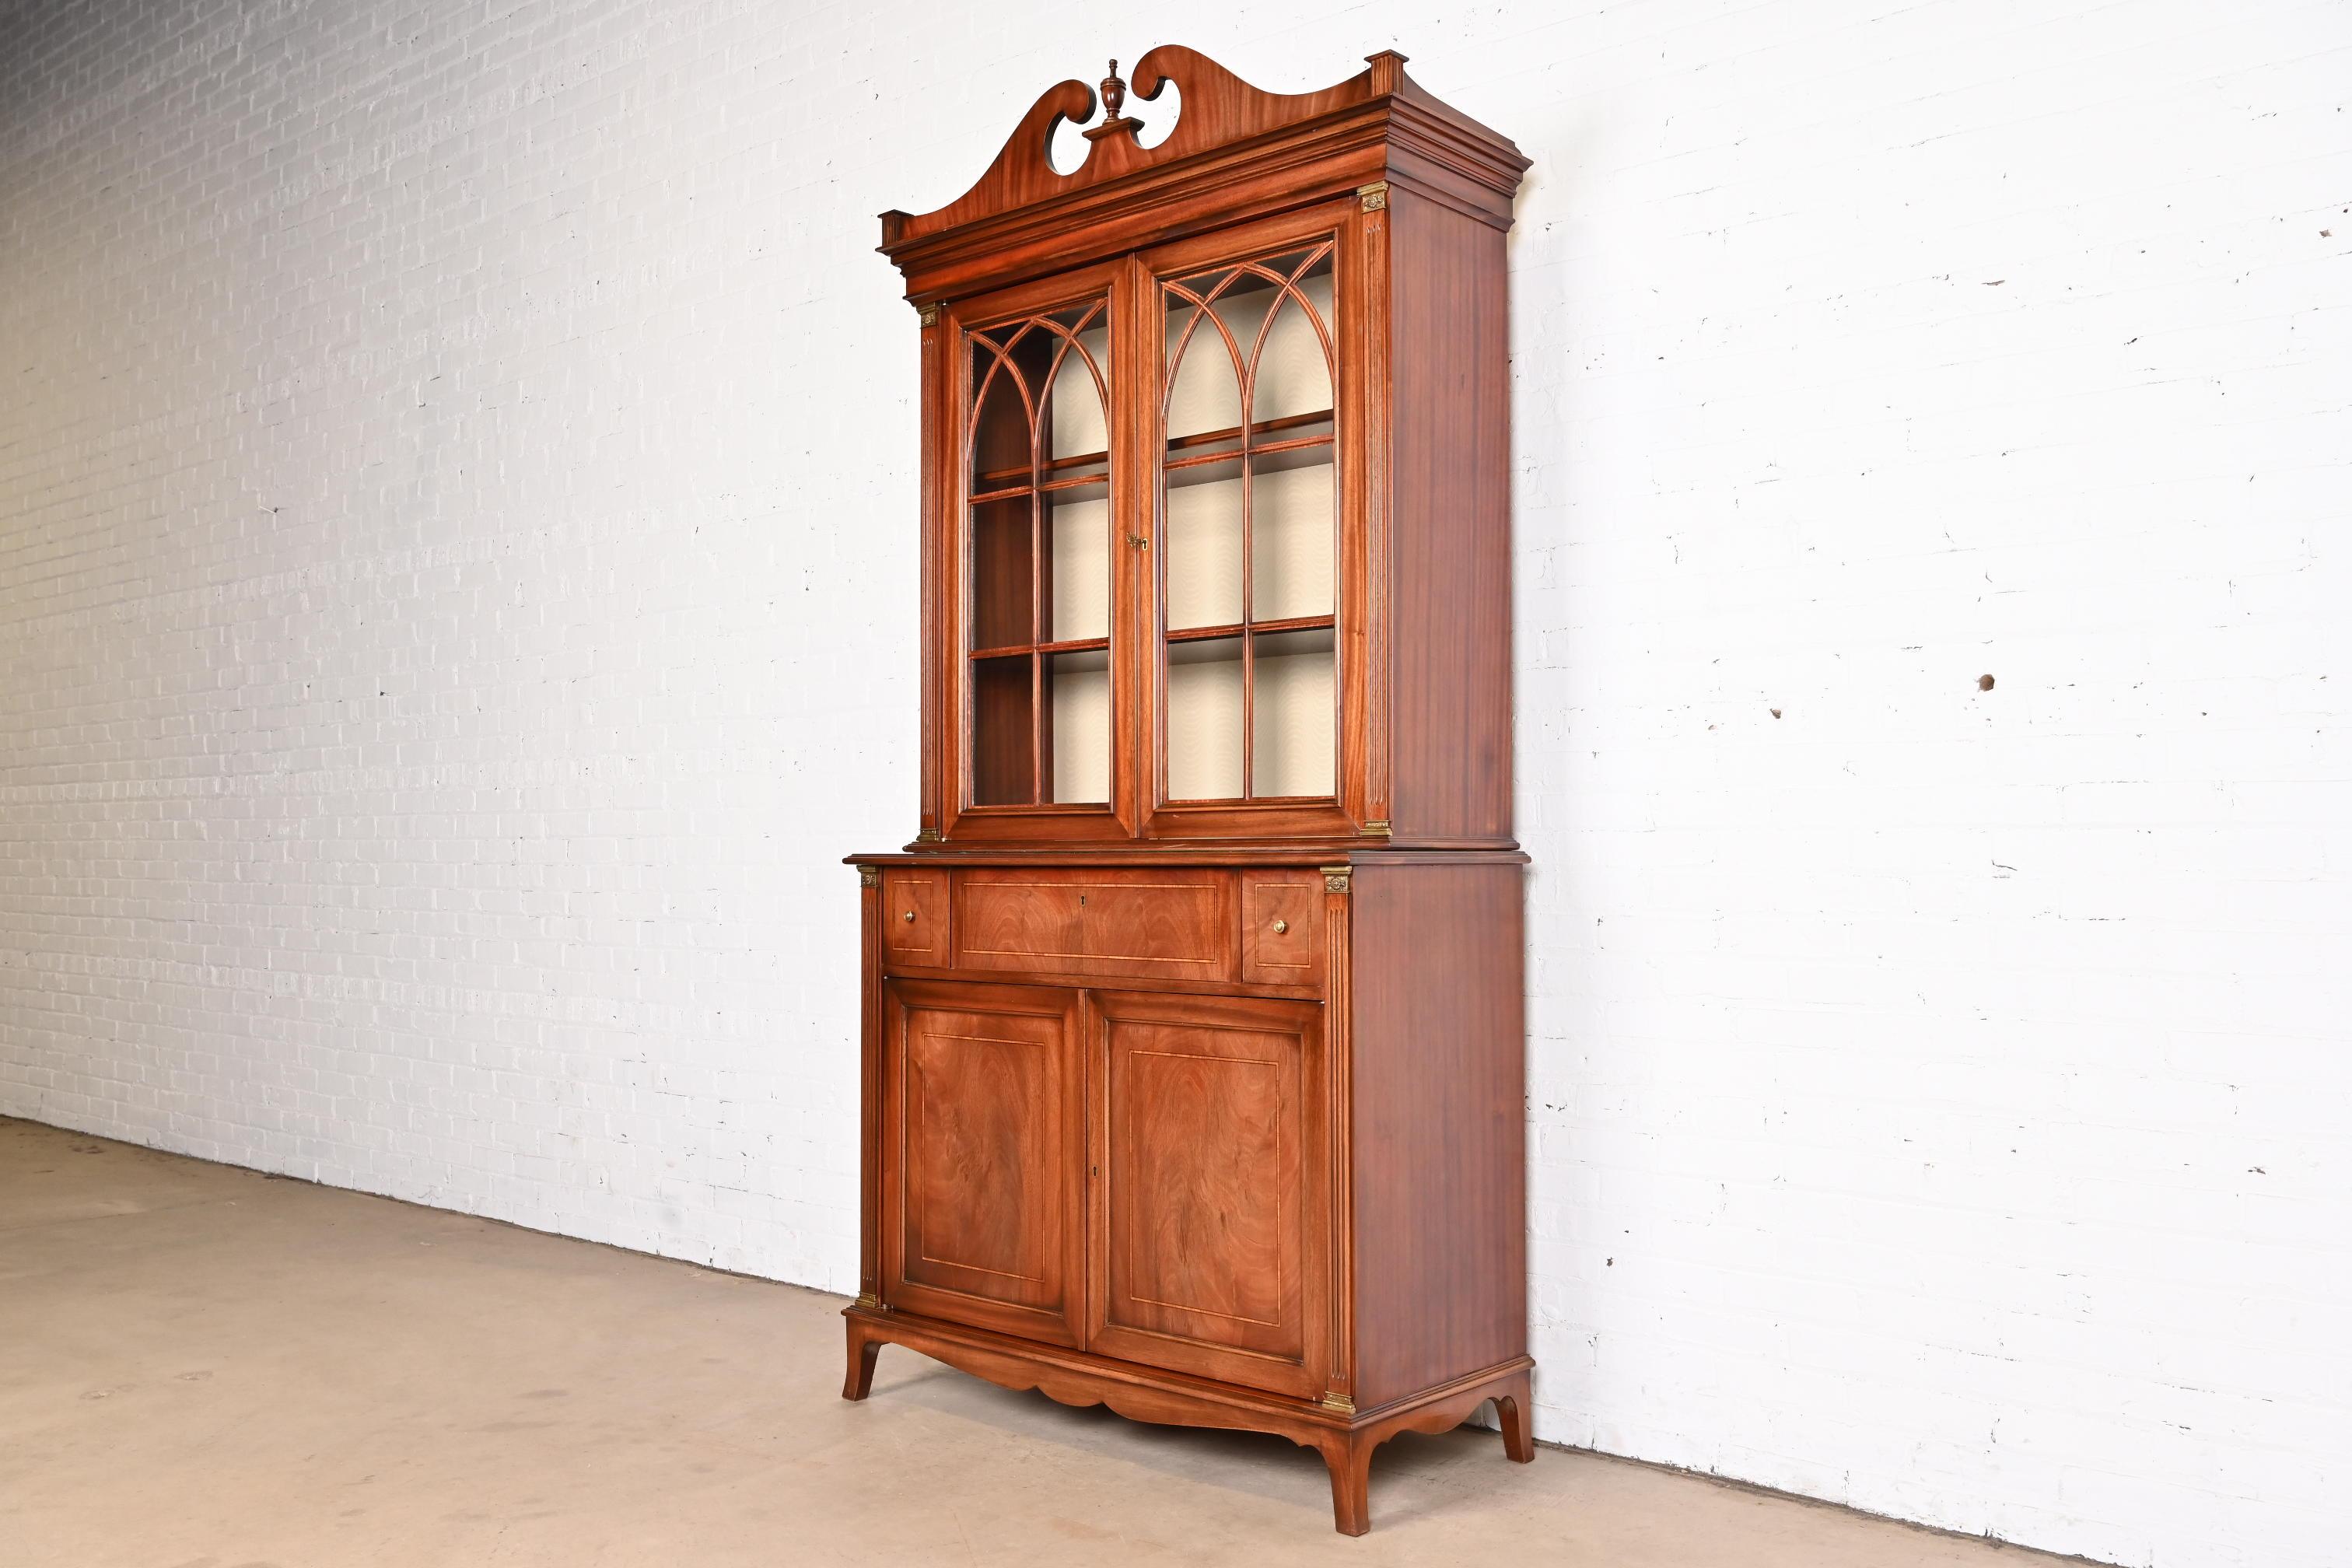 A beautiful Georgian or Chippendale style breakfront bookcase cabinet with drop front secretary desk

From the Armando Collection

Italy, Late 20th Century

Gorgeous carved mahogany, with original brass hardware and accents, mullioned glass